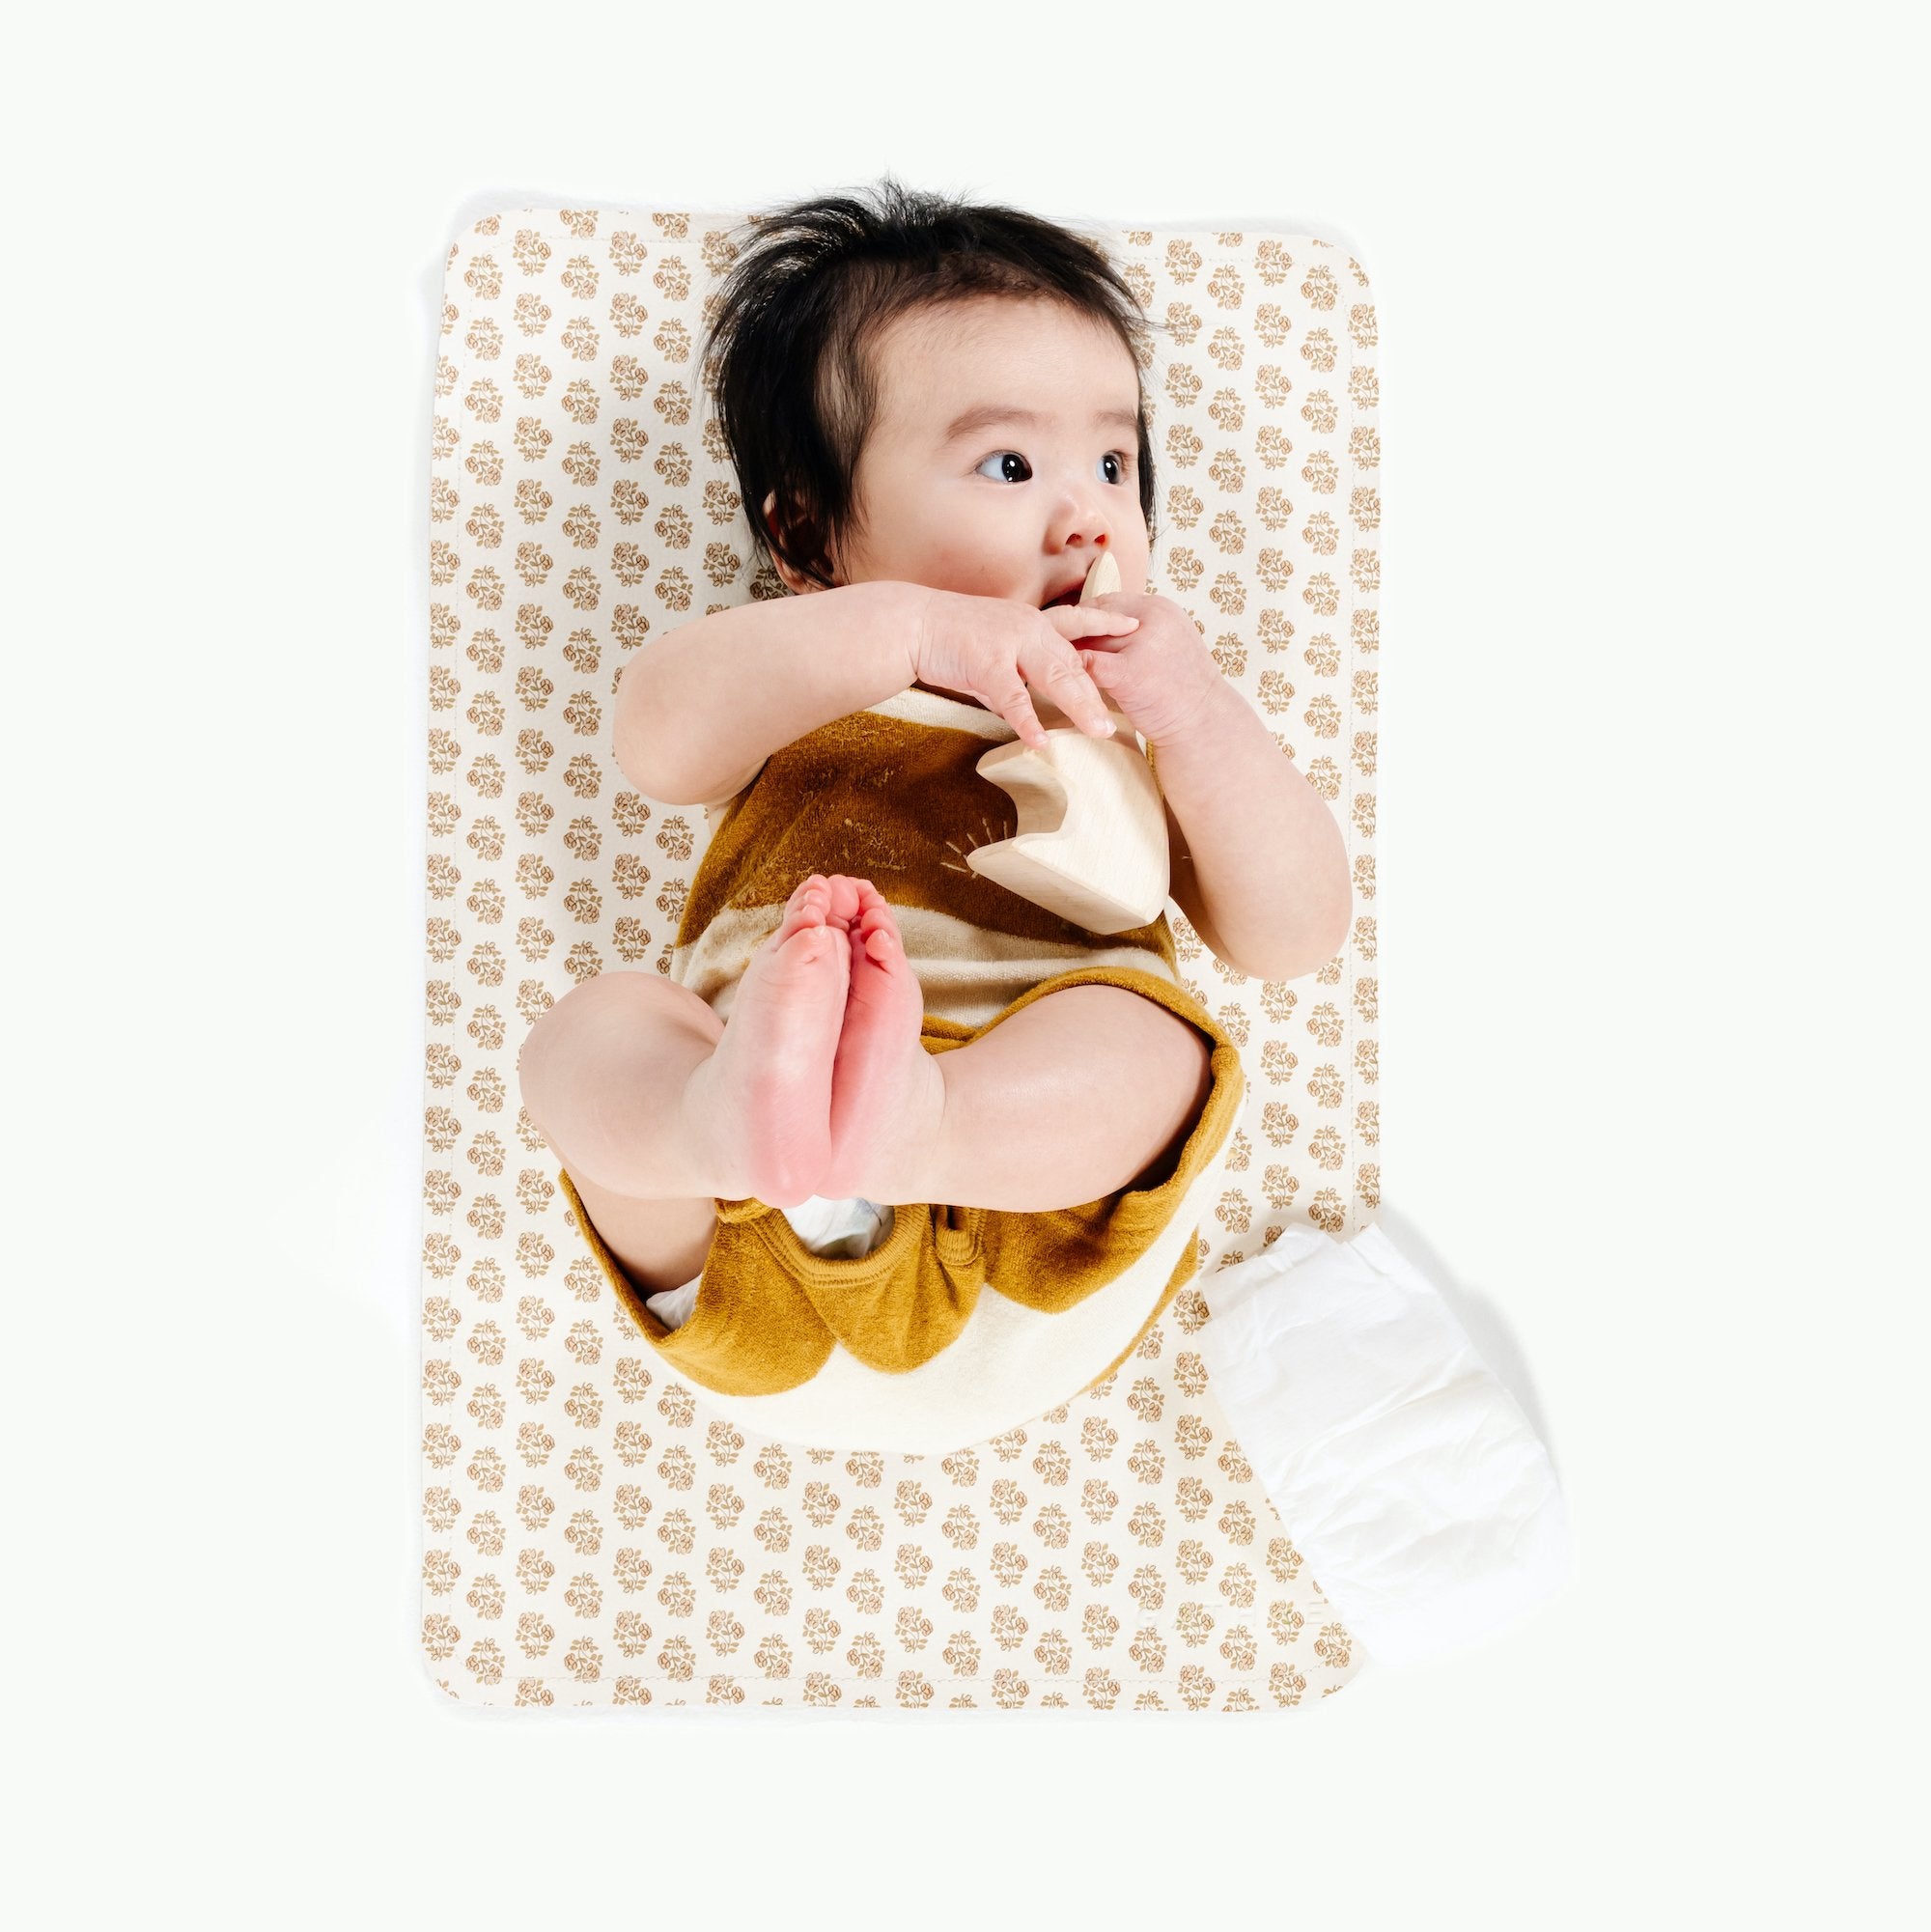 Bloom (on sale)@Overhead of baby on the Bloom Micro Mat